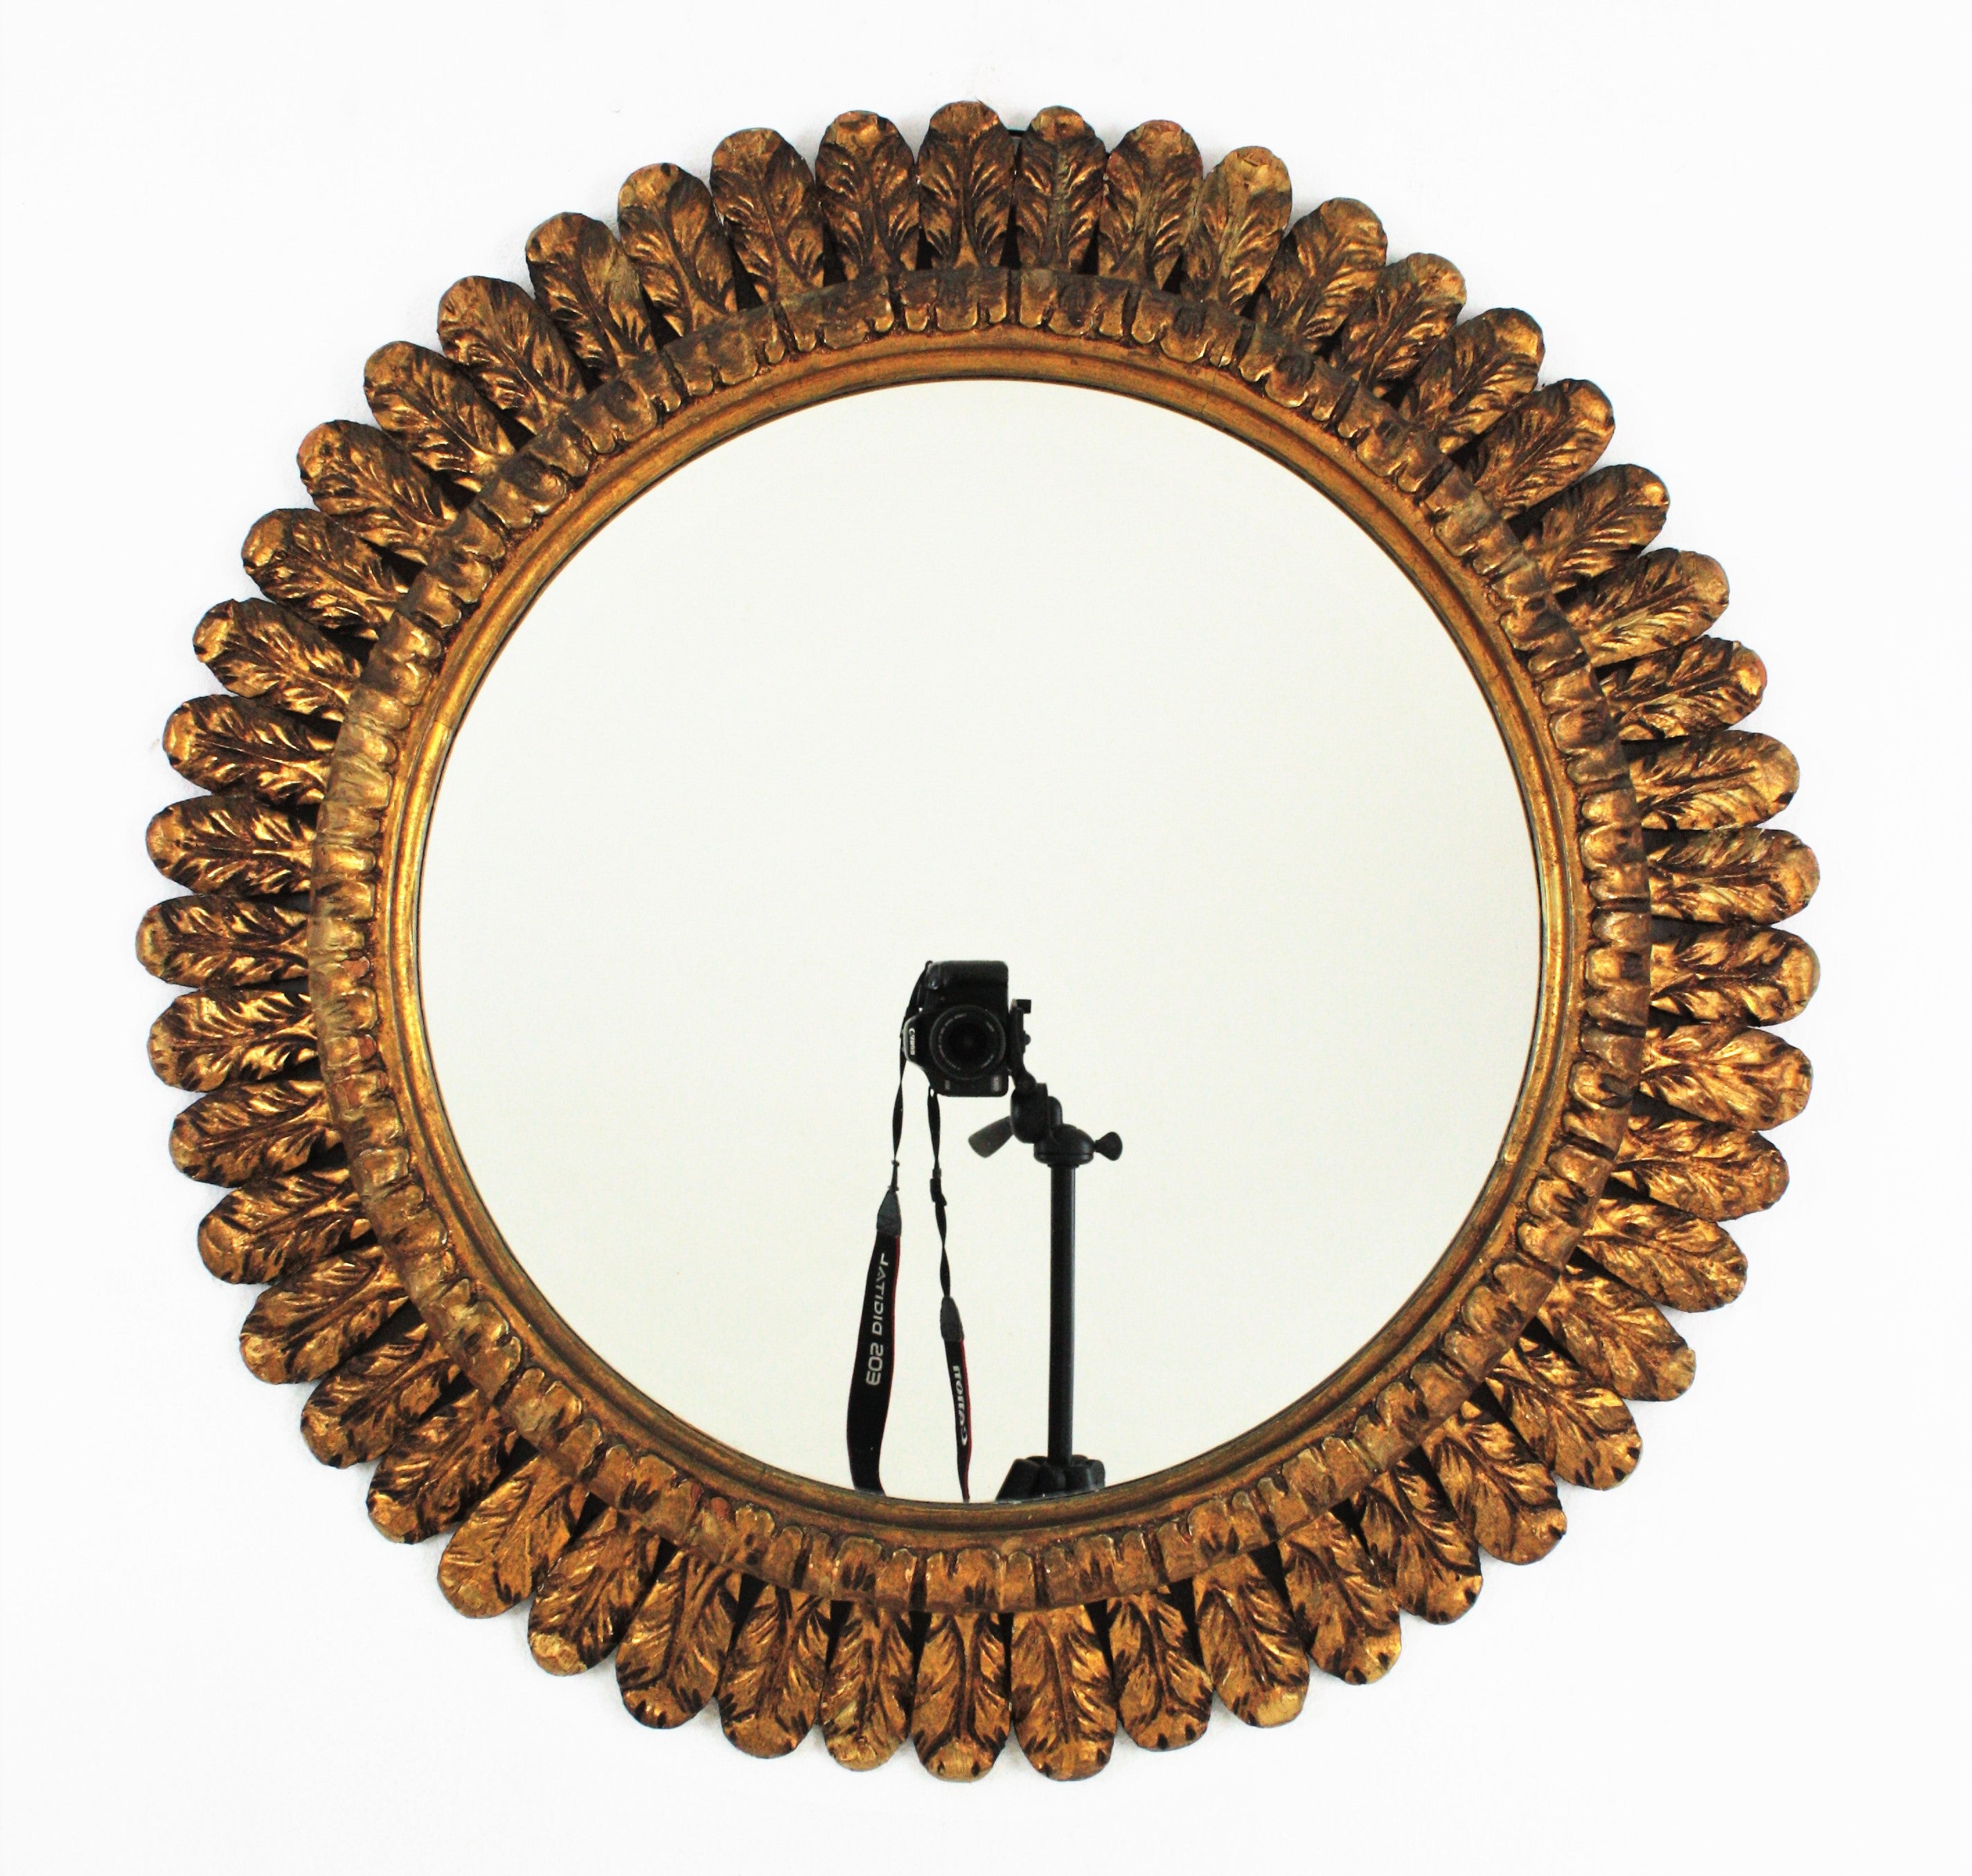 Sunburst Mirror, Gilt Carved Wood, France, 1950s.
A gorgeous hand carved french sunburst mirror with a frame richly decorated by waterleaves and gold leaf gilding.
Manufactured in the Mid-20th century period in the style of Hollywood Regency